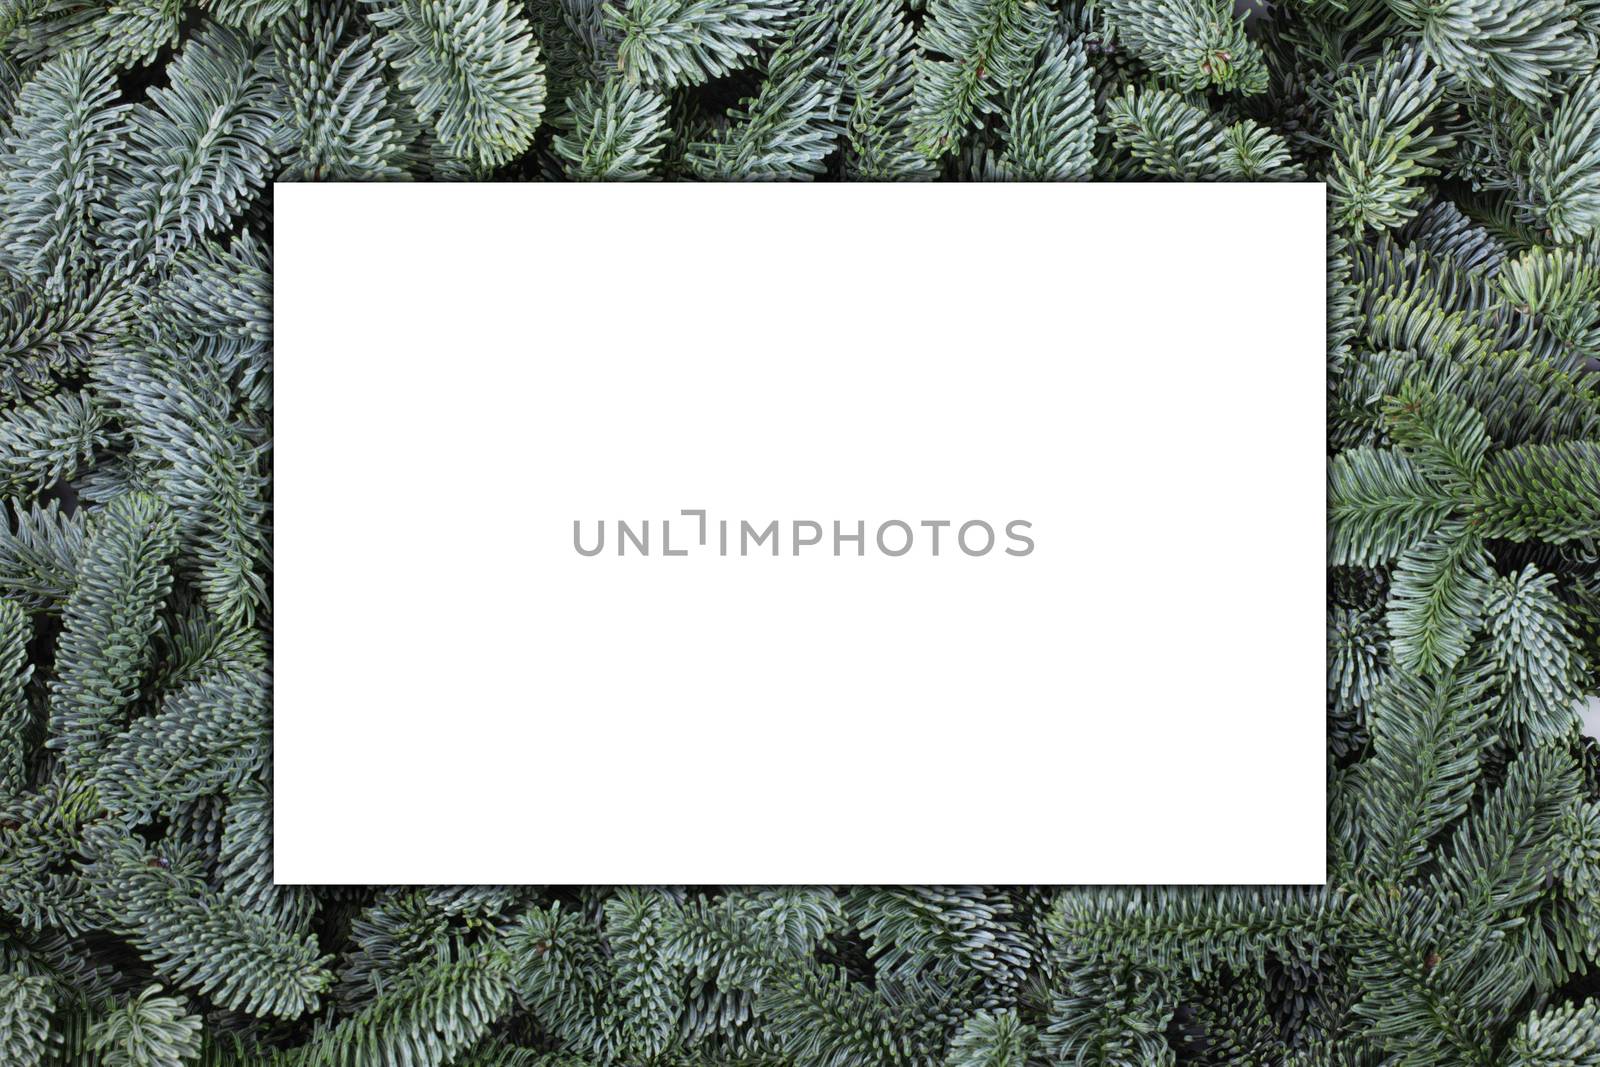 Fir tree branch frame on white by Yellowj